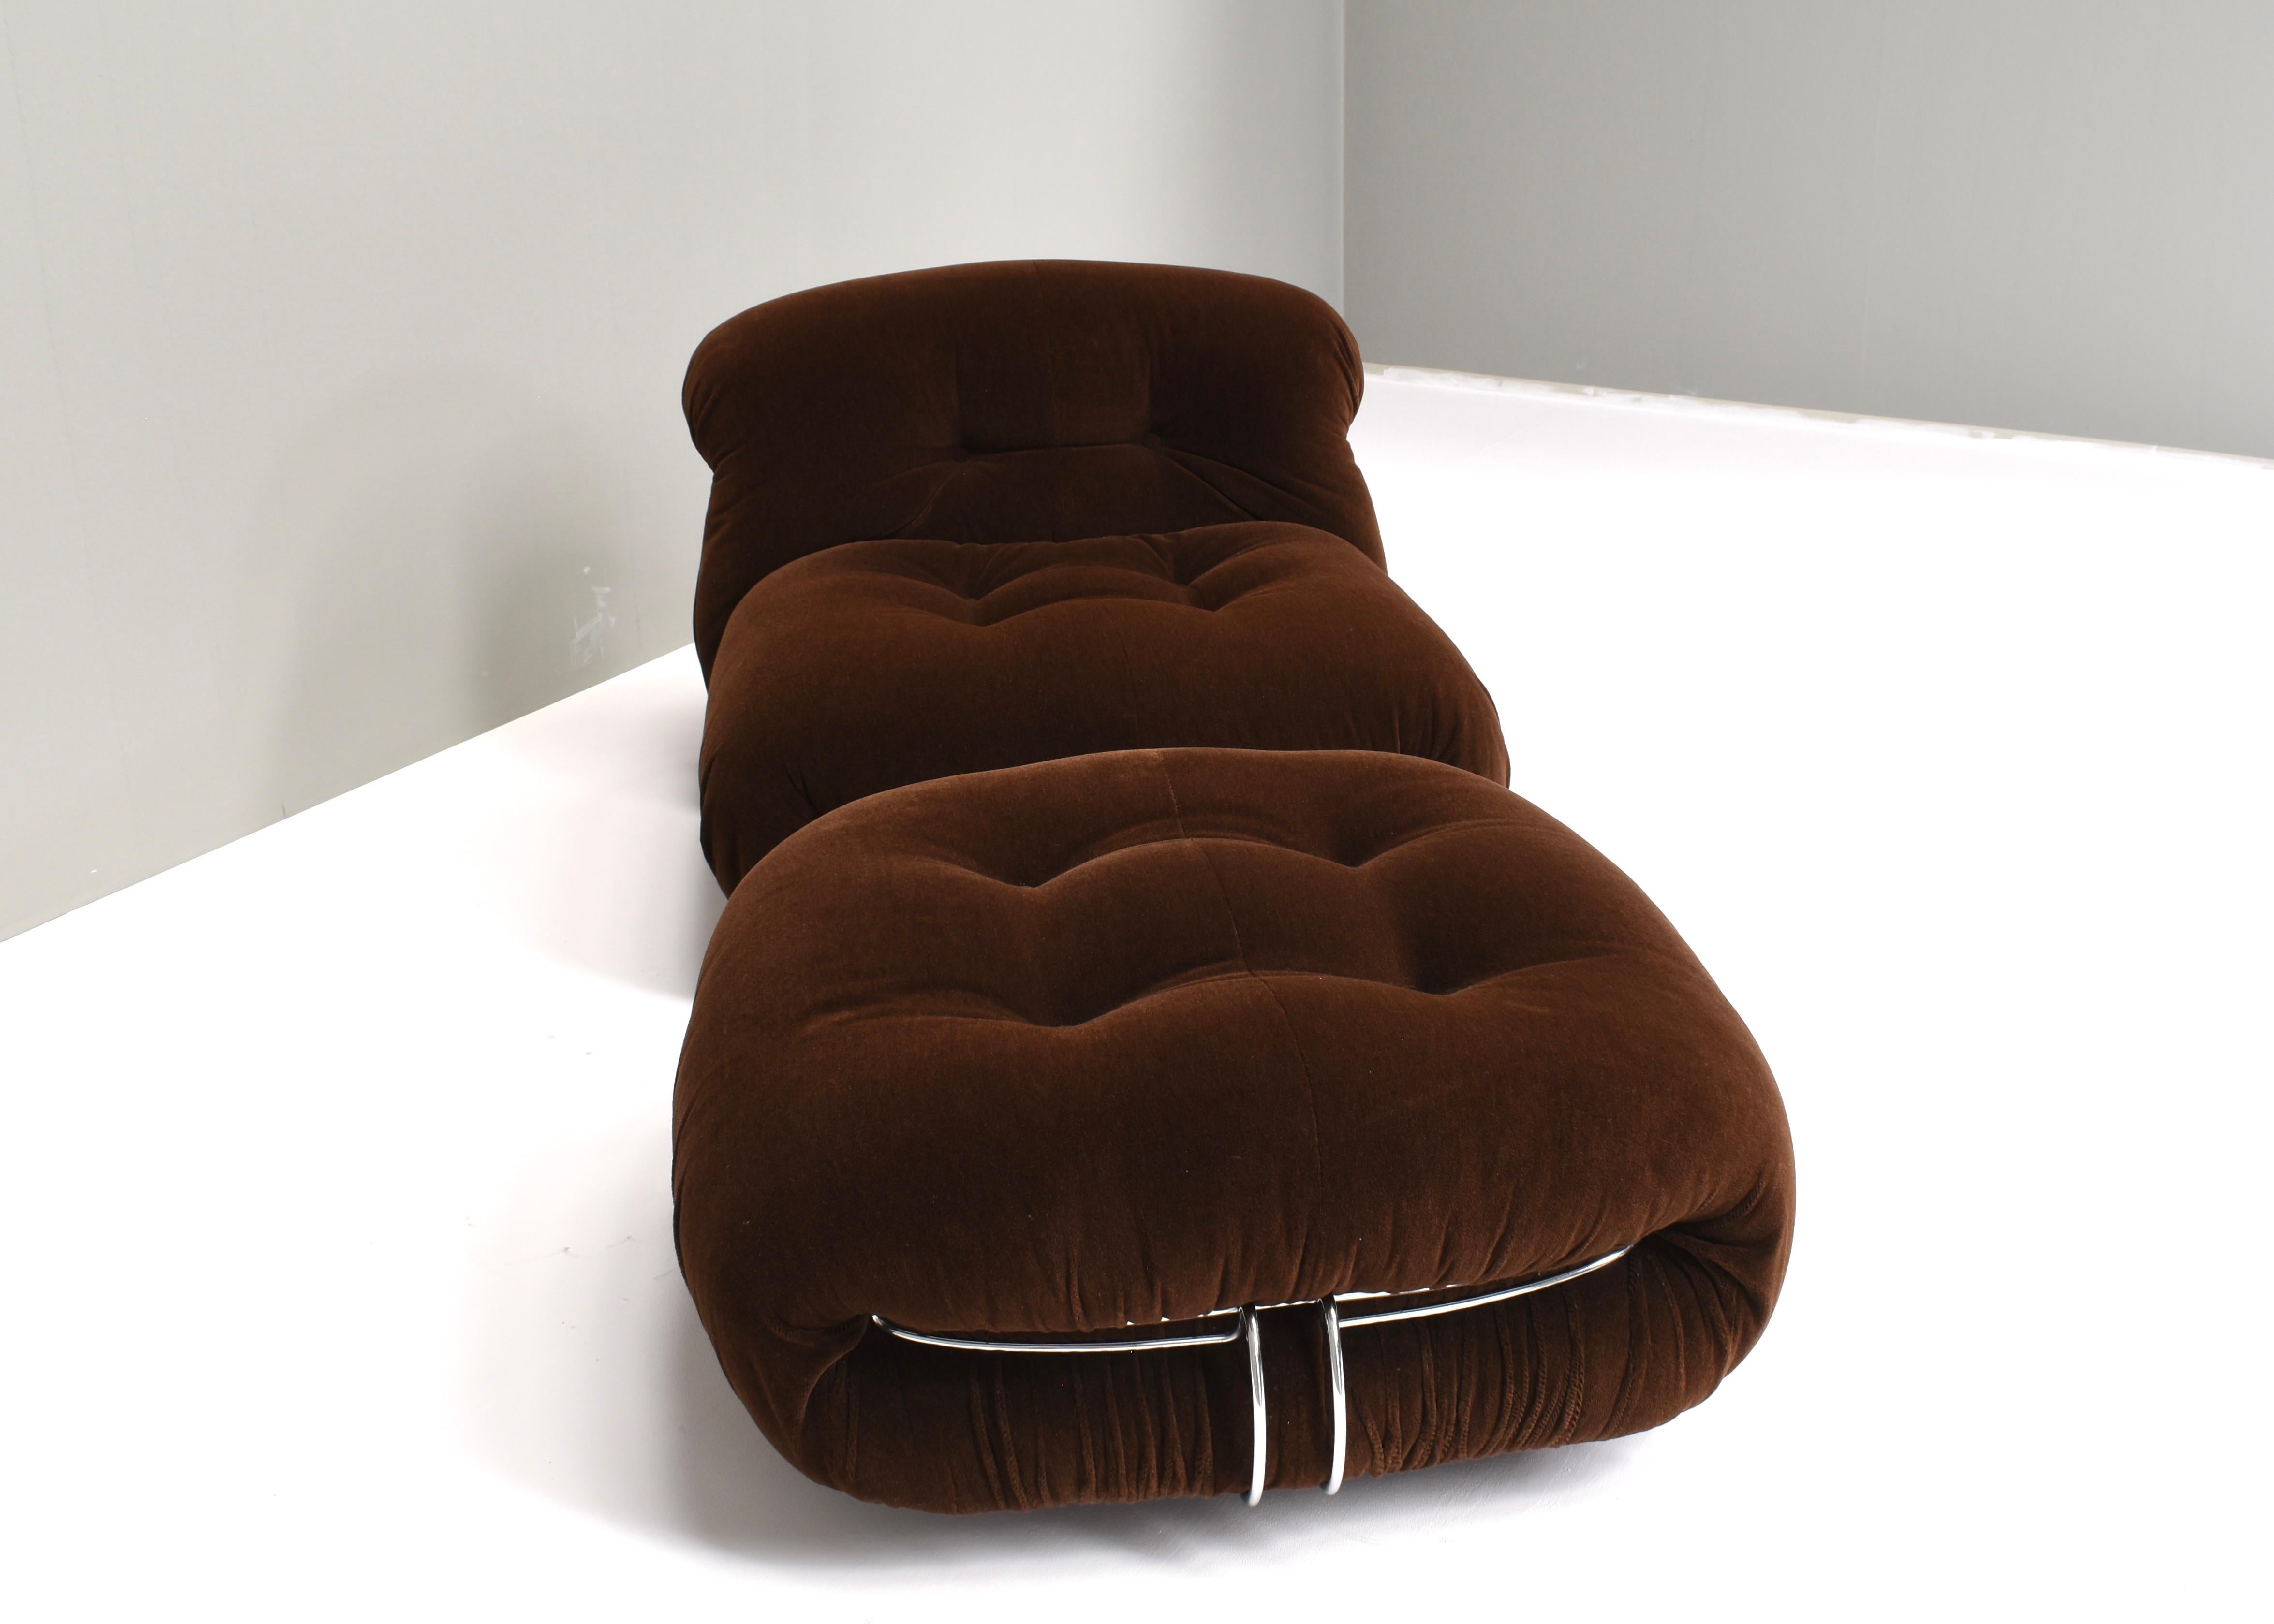 Soriana chair and ottoman by Afra & Tobia Scarpa for Cassina in original dark brown Mohair wool, Italy, circa 1970. In very good original condition / almost no wear / no stains

Designer: Afra & Tobia Scarpa

Manufacturer: Cassina

Country: